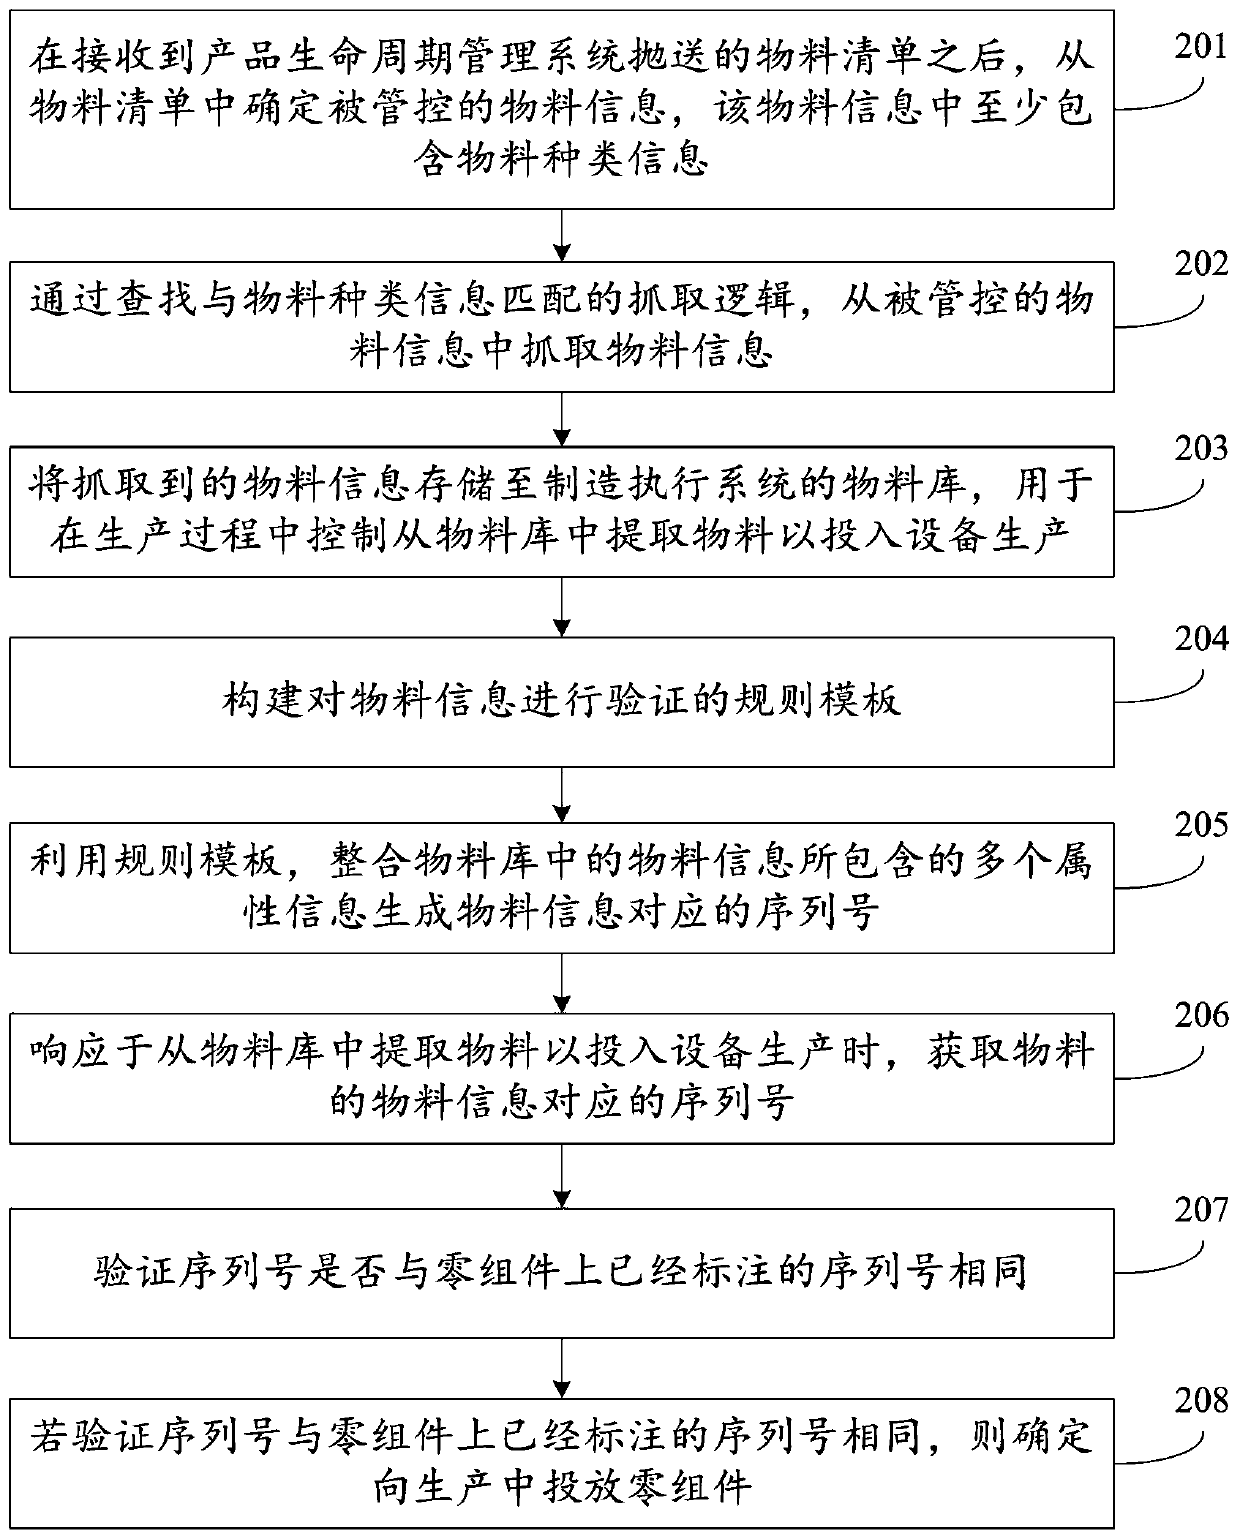 Method and device for automatically transmitting product main data information